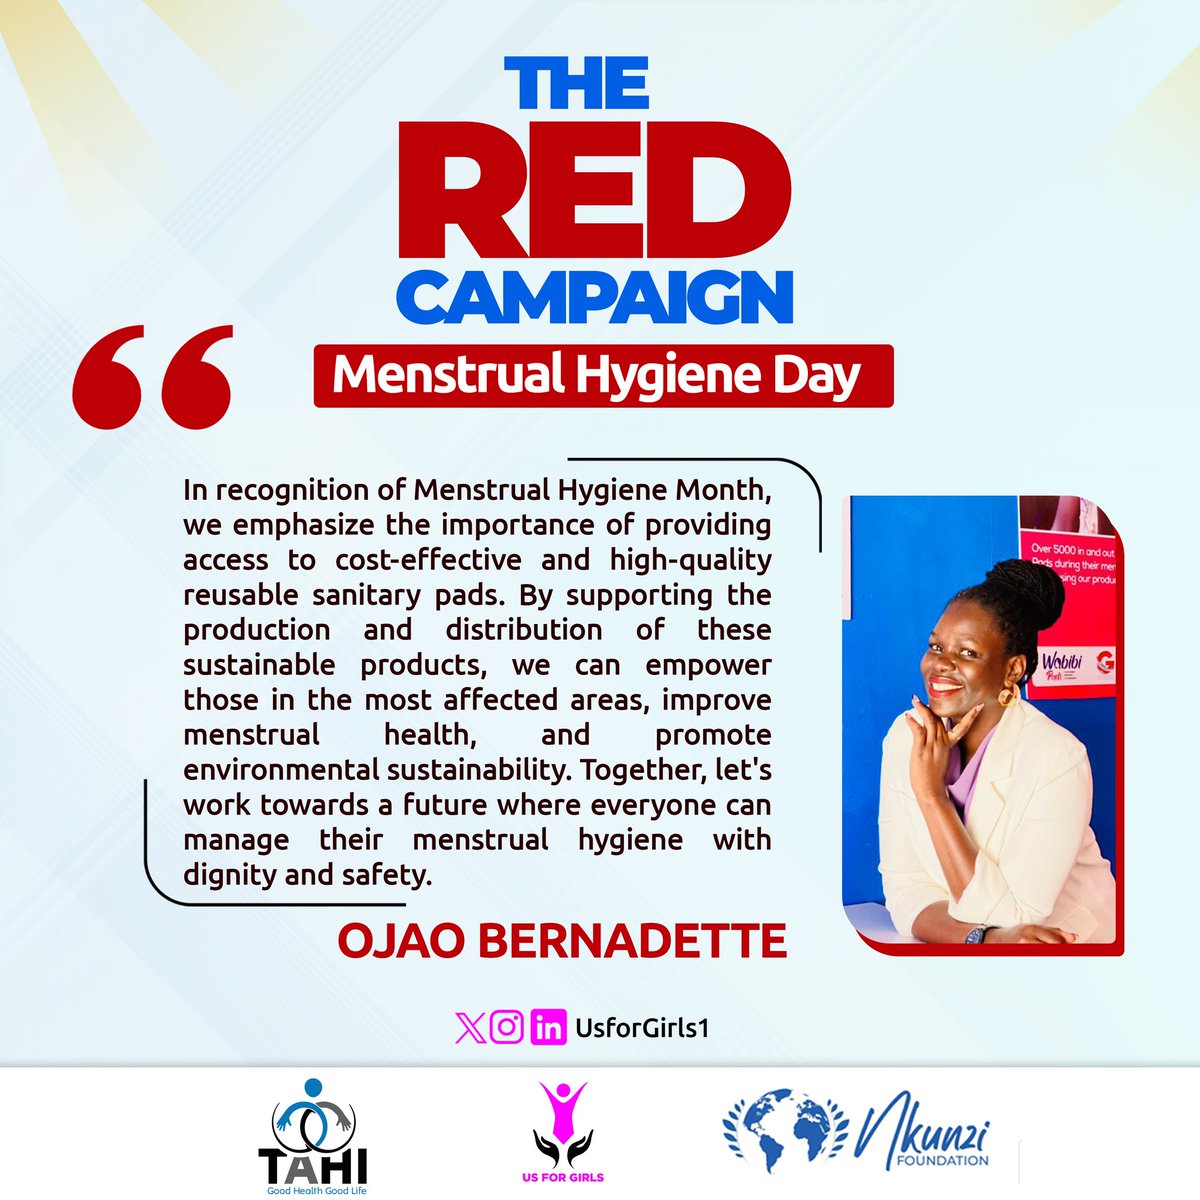 #RedCampaign

@CreativeBernad1 of @wabibipads emphasizes the importance of providing access to cost effective and sustainable period products, esp in rural areas, to help improve Menstrual health so everyone can have safe and dignified periods.

#EndPeriodPoverty